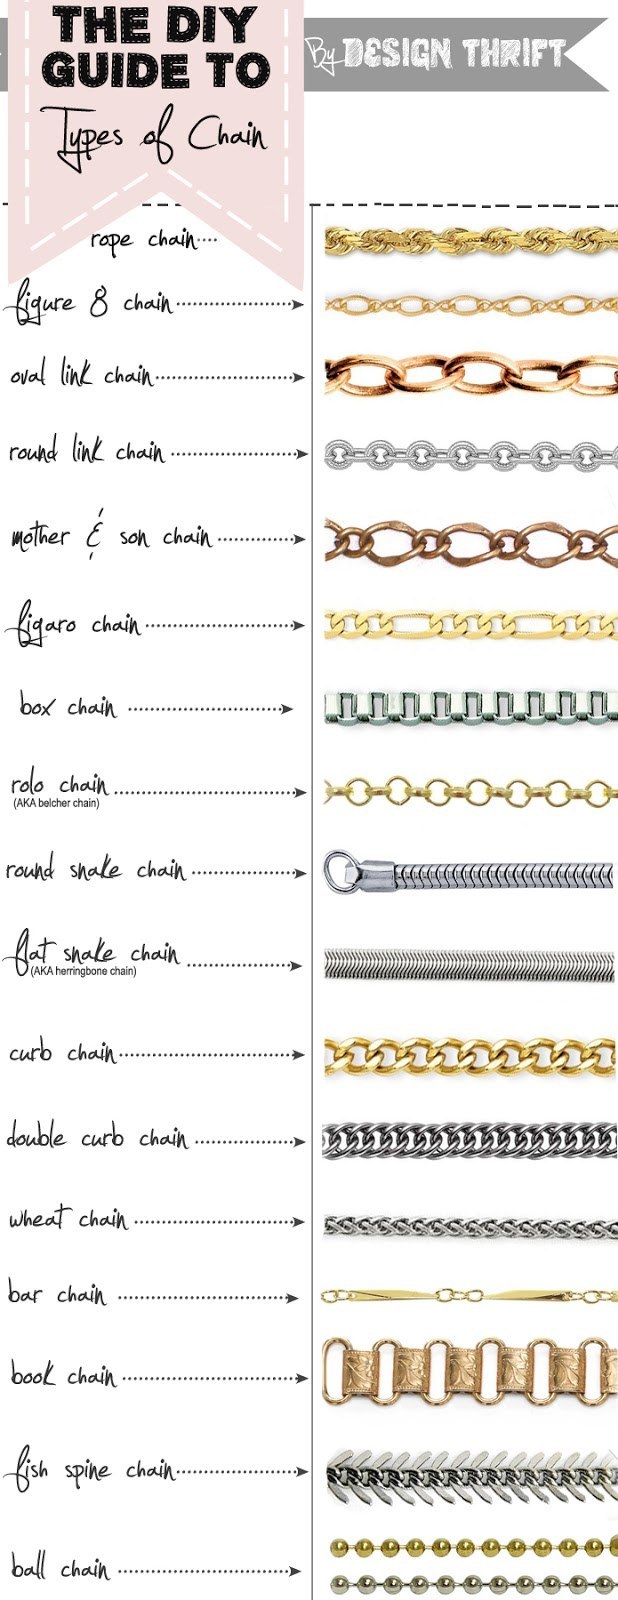 For selecting the optimal type of chain.